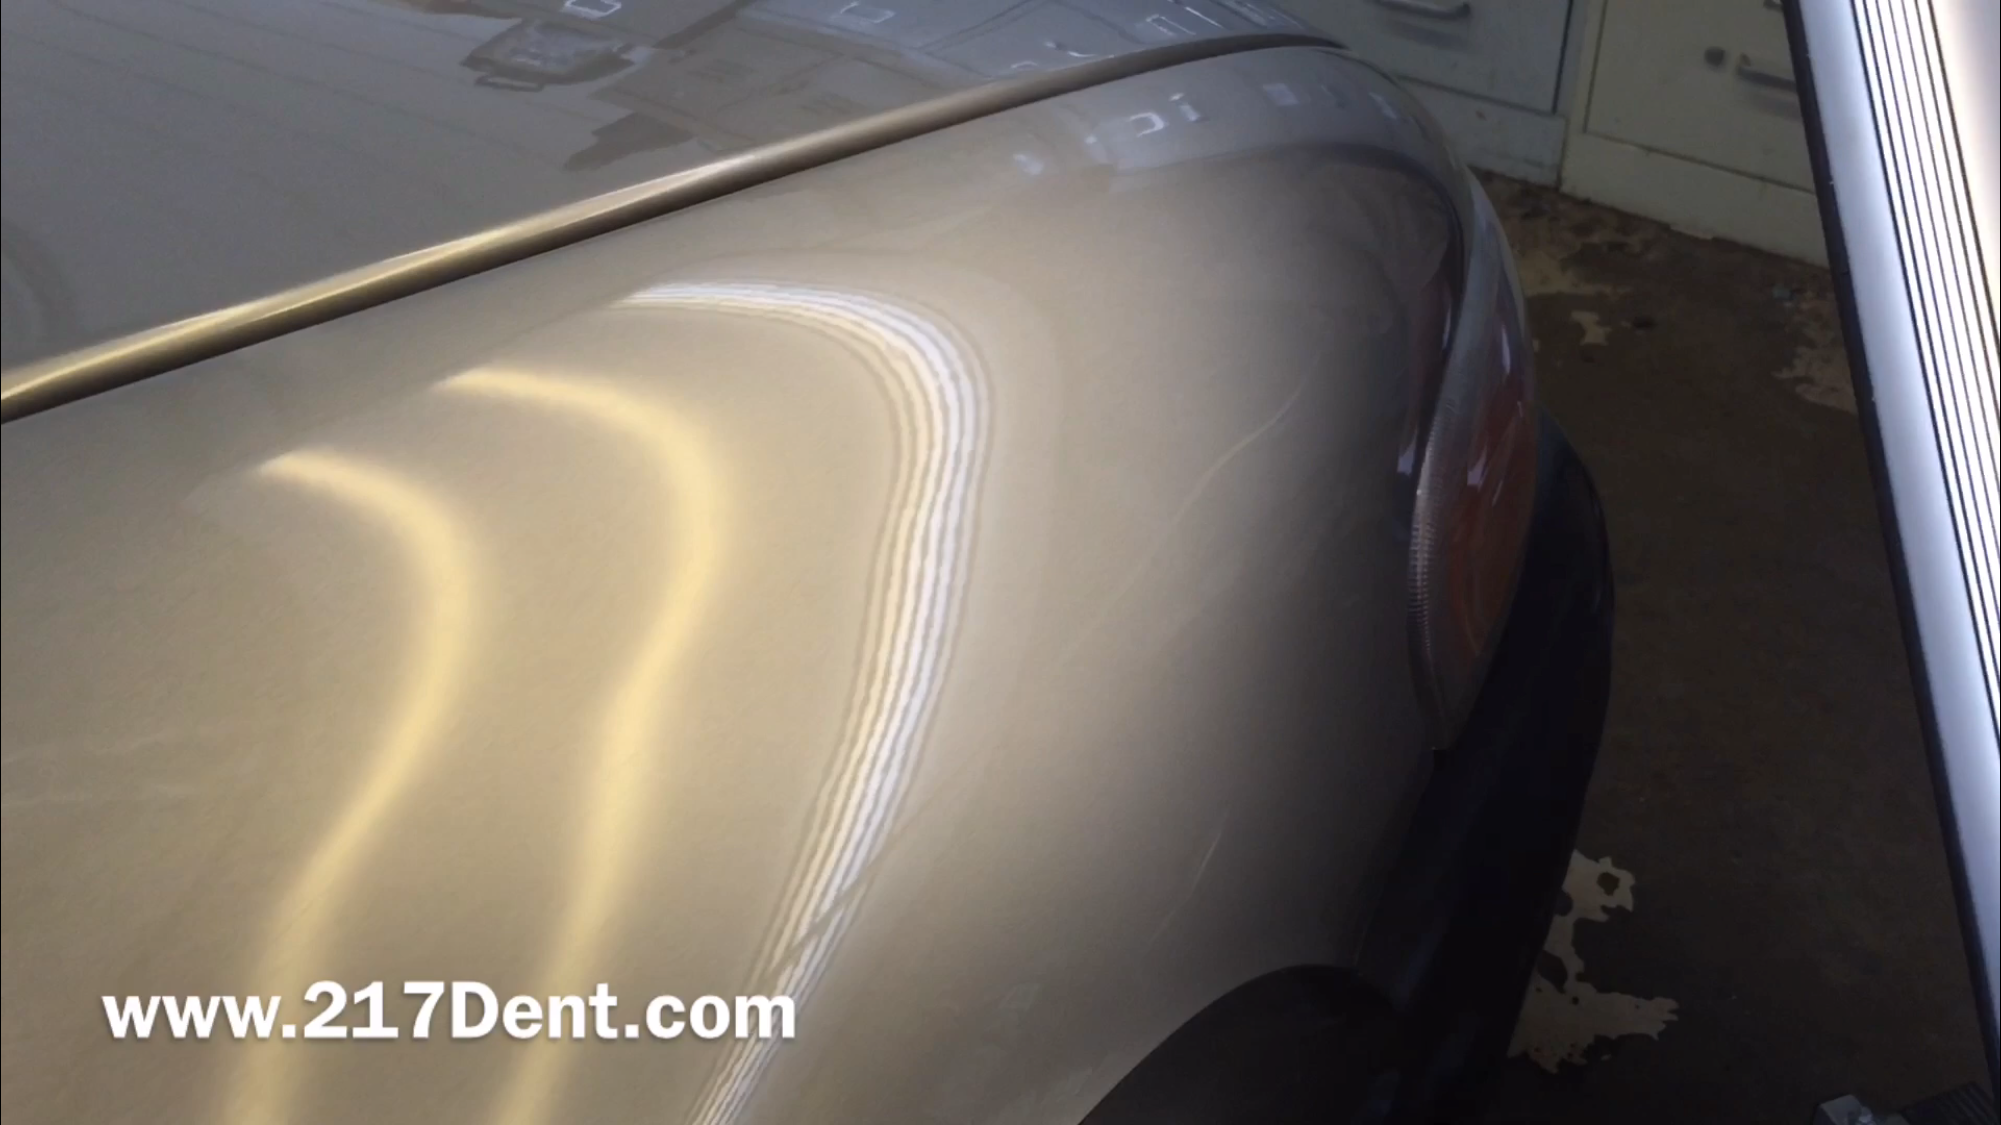 2004 Montana Van, Dent removal, paintless Dent Removal, Springfield, IL, http://217dent.com